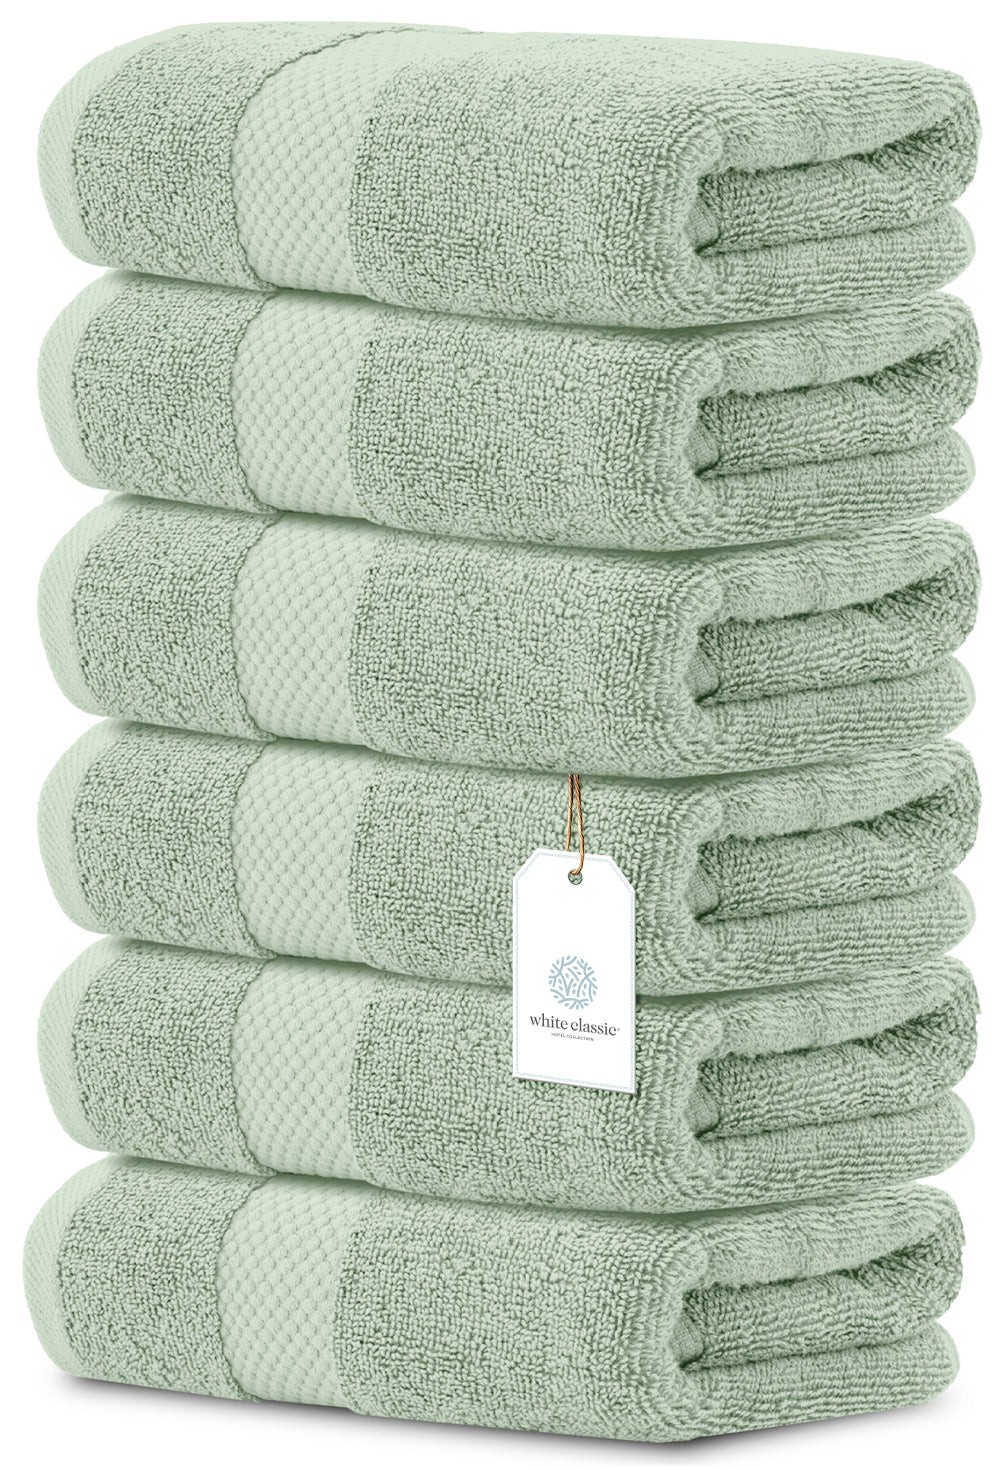 White Classic Luxury Hand Towels for Bathroom-Hotel-Spa-Kitchen-Set -  Circlet Egyptian Cotton - 16x30 Inches - Set of 6 (Lavender)